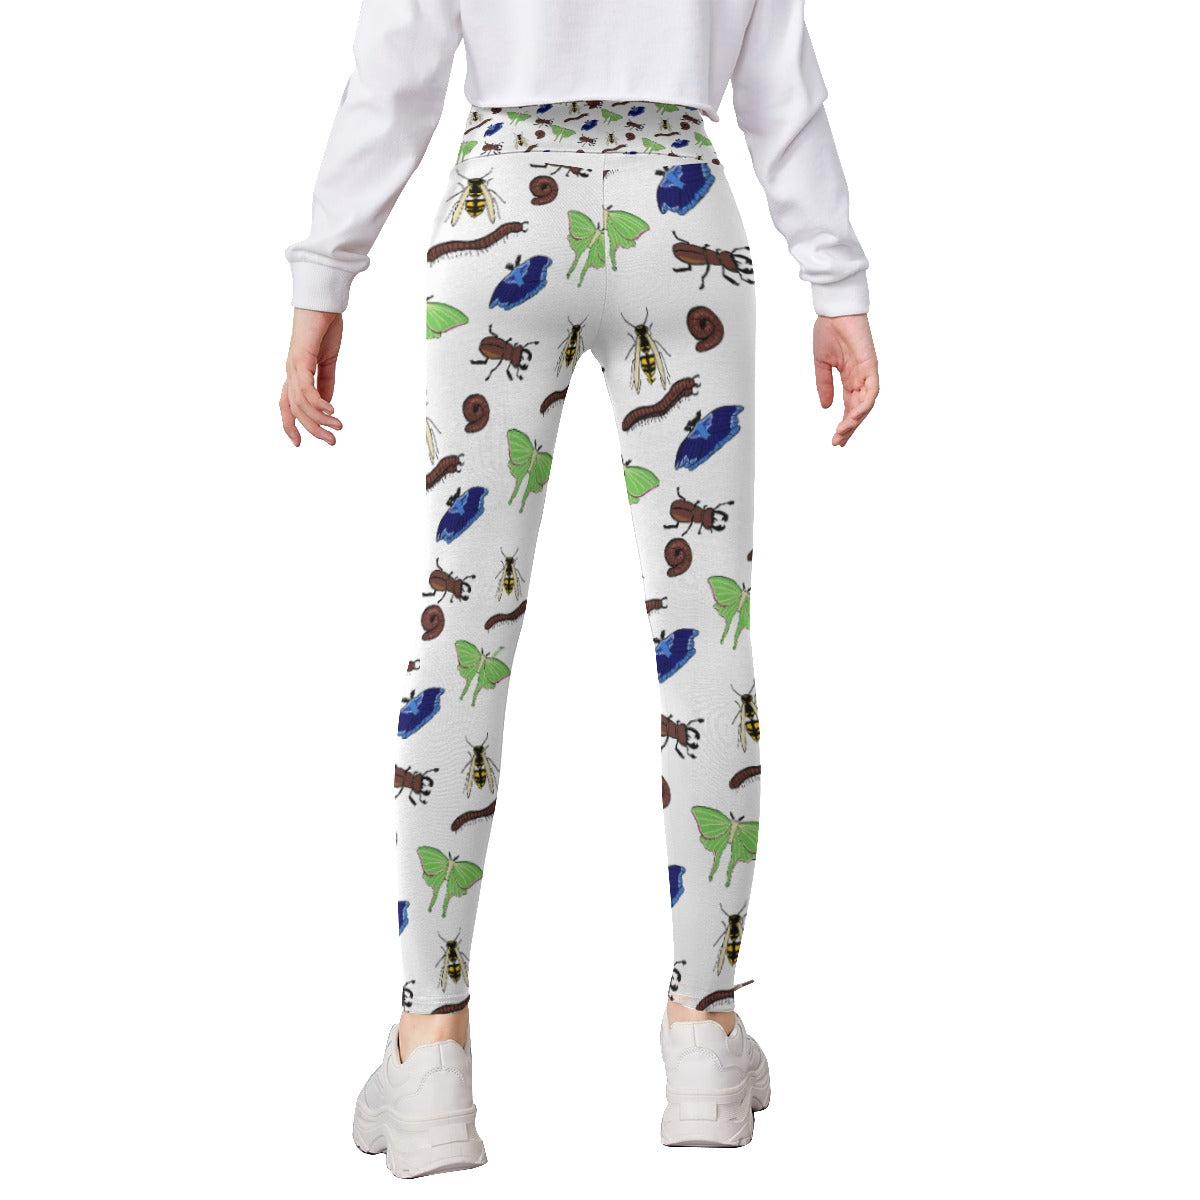 Girls Bug Leggings with Star - Clothes that Calm